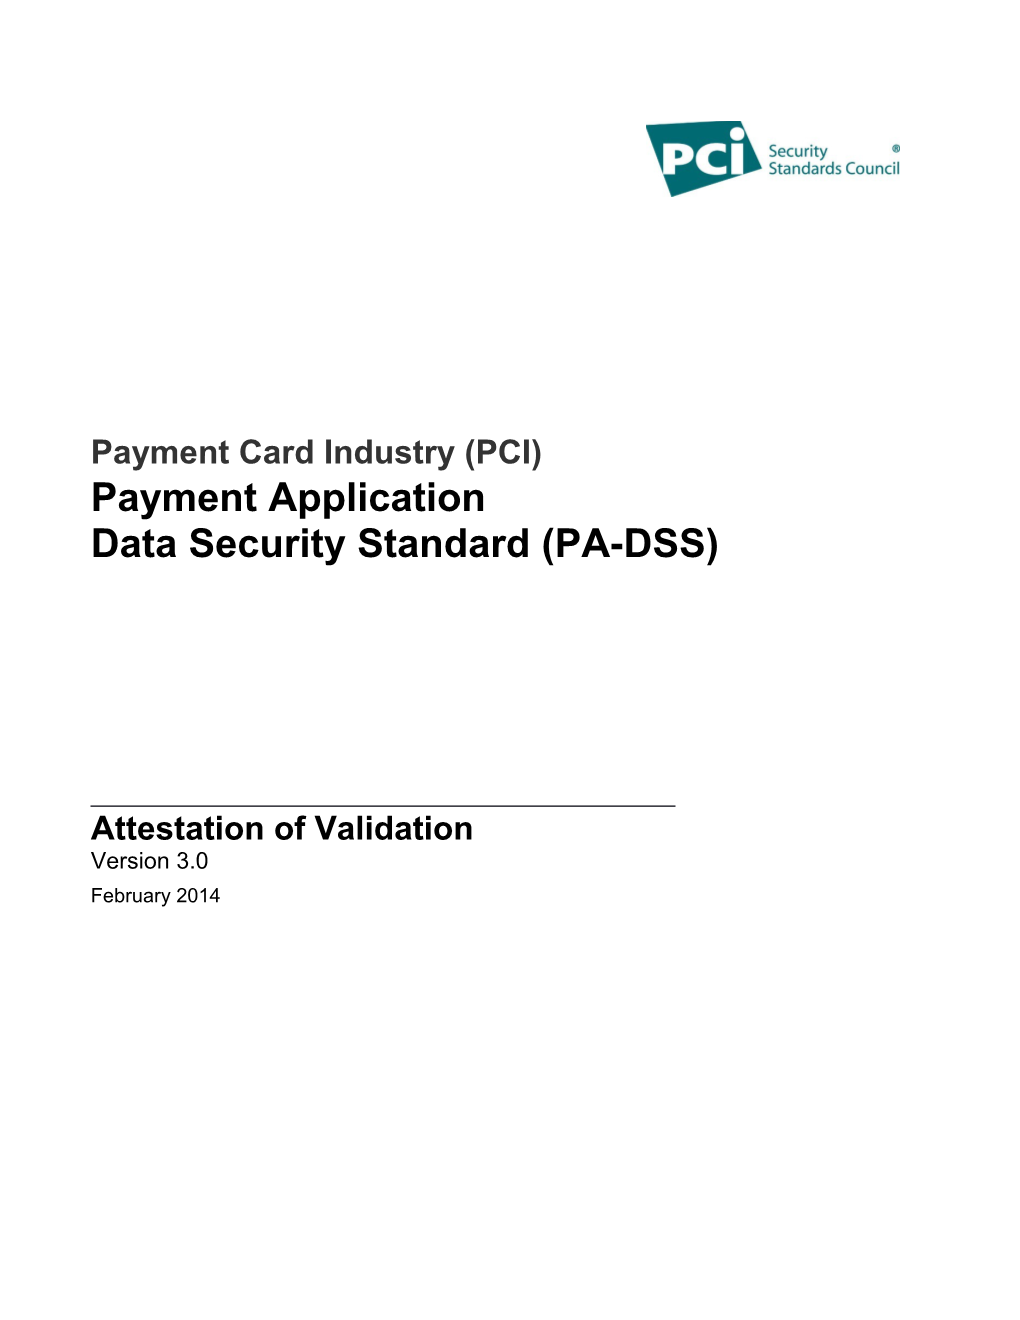 Payment Card Industry (PCI) Payment Application Data Security Standard (PA-DSS)